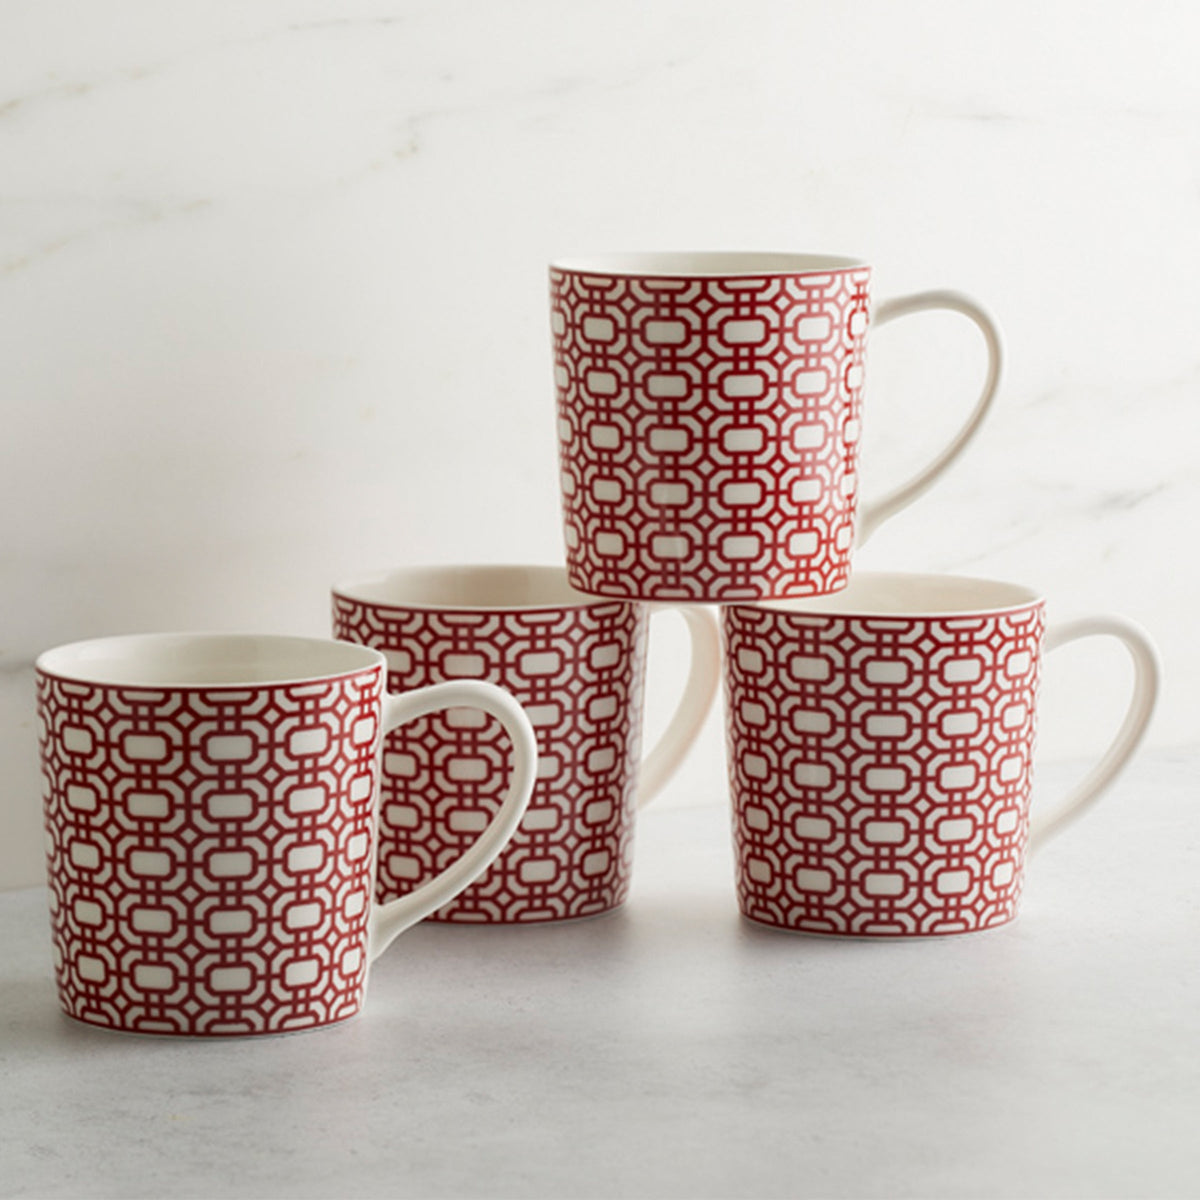 Four Newport Garden Gate Crimson Mugs with red and white designs on them.